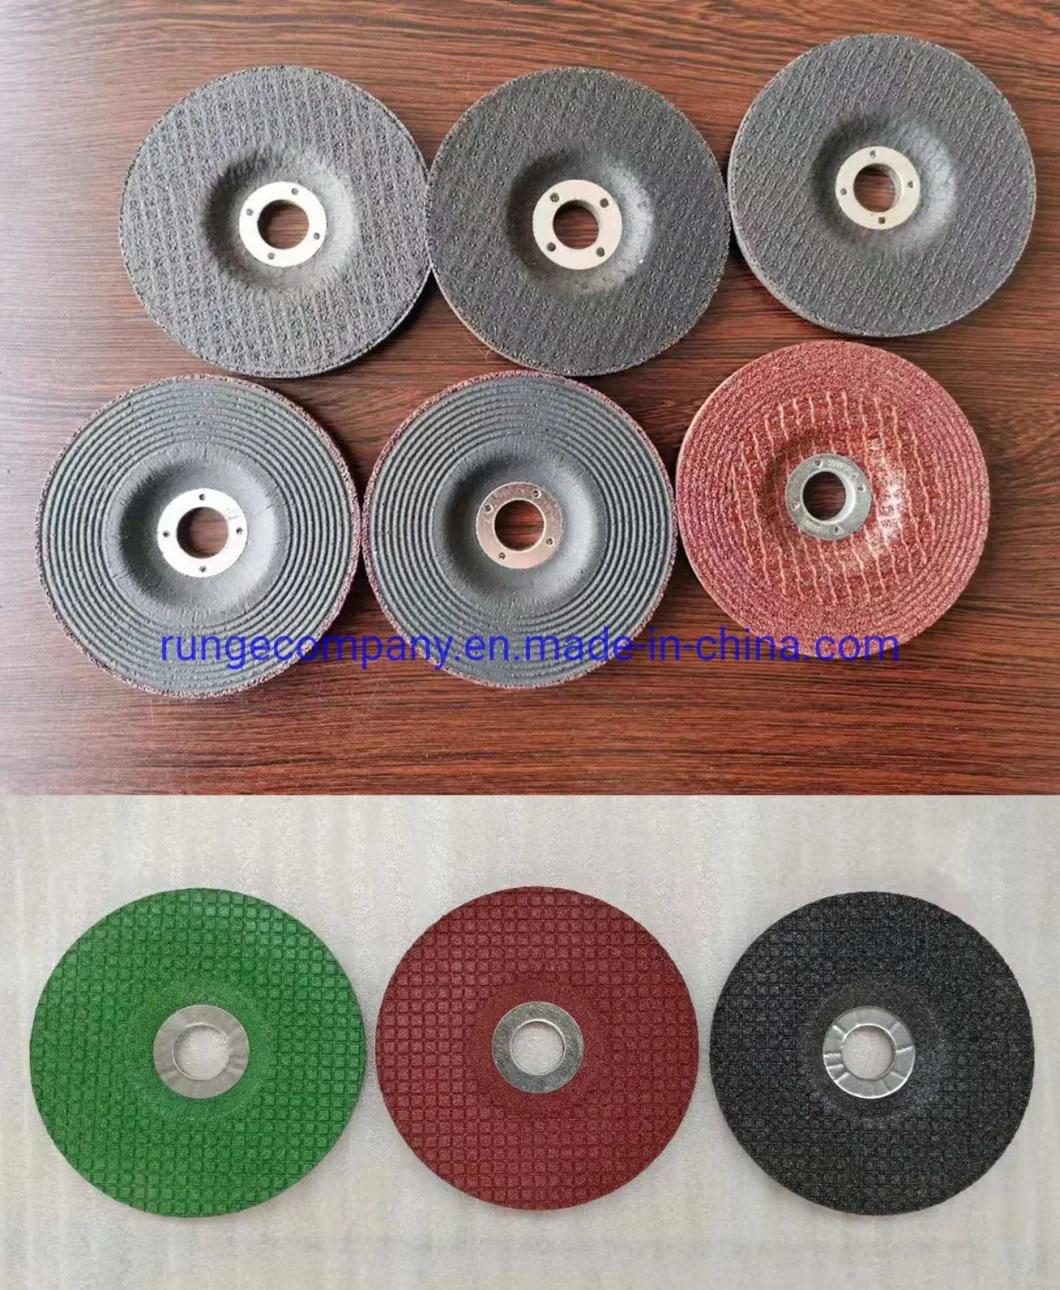 Electric Power Tools Accessories 4.5" Grinding Wheel for Grinders - Aggressive Grinding for Metal 4-1/2" X 1/4 X 7/8 Inch